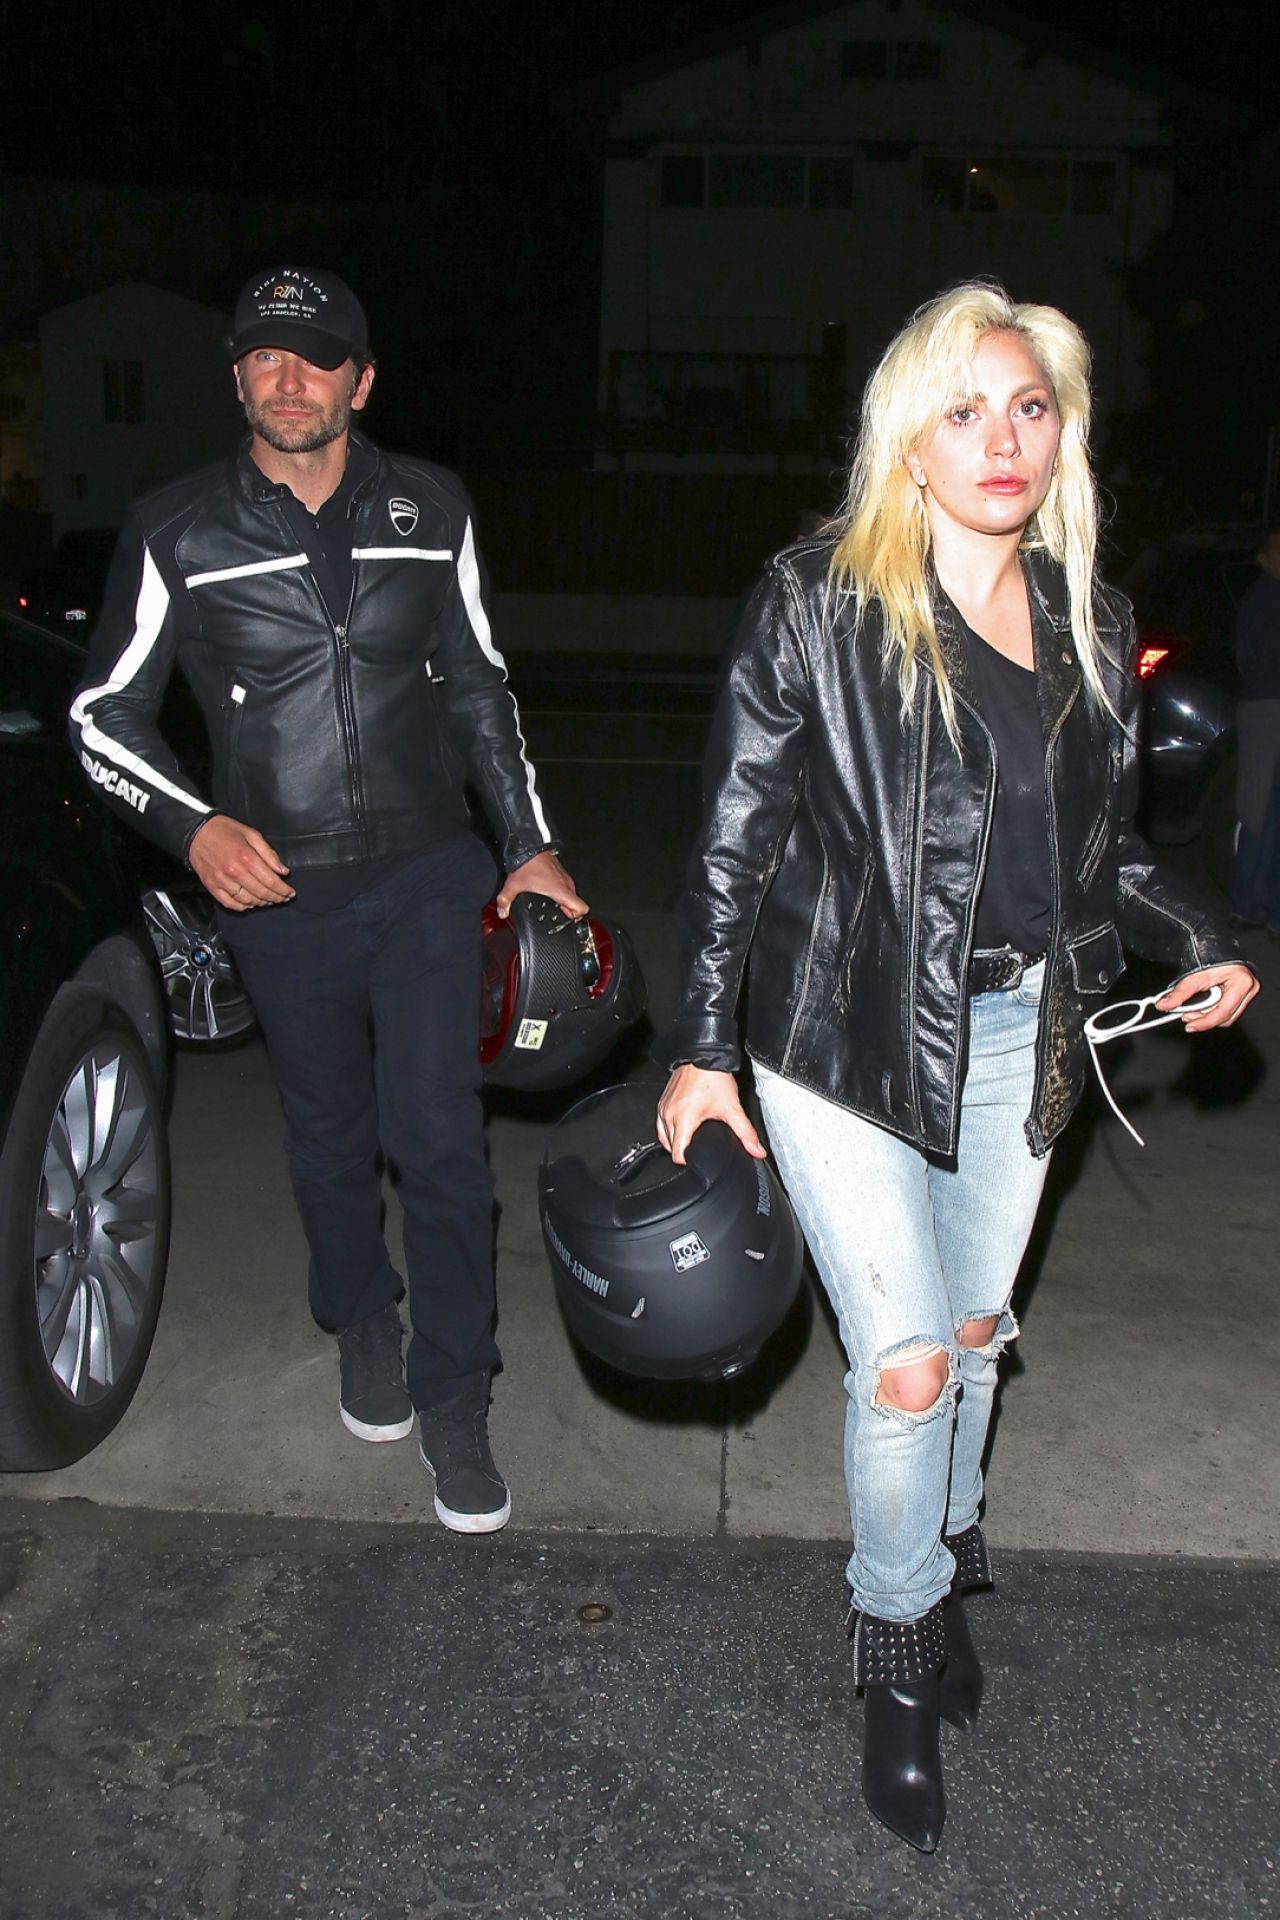 Lady Gaga - Arrives With Bradley Cooper on his Ducati Motorcycle Together for Dinner ...1280 x 1920